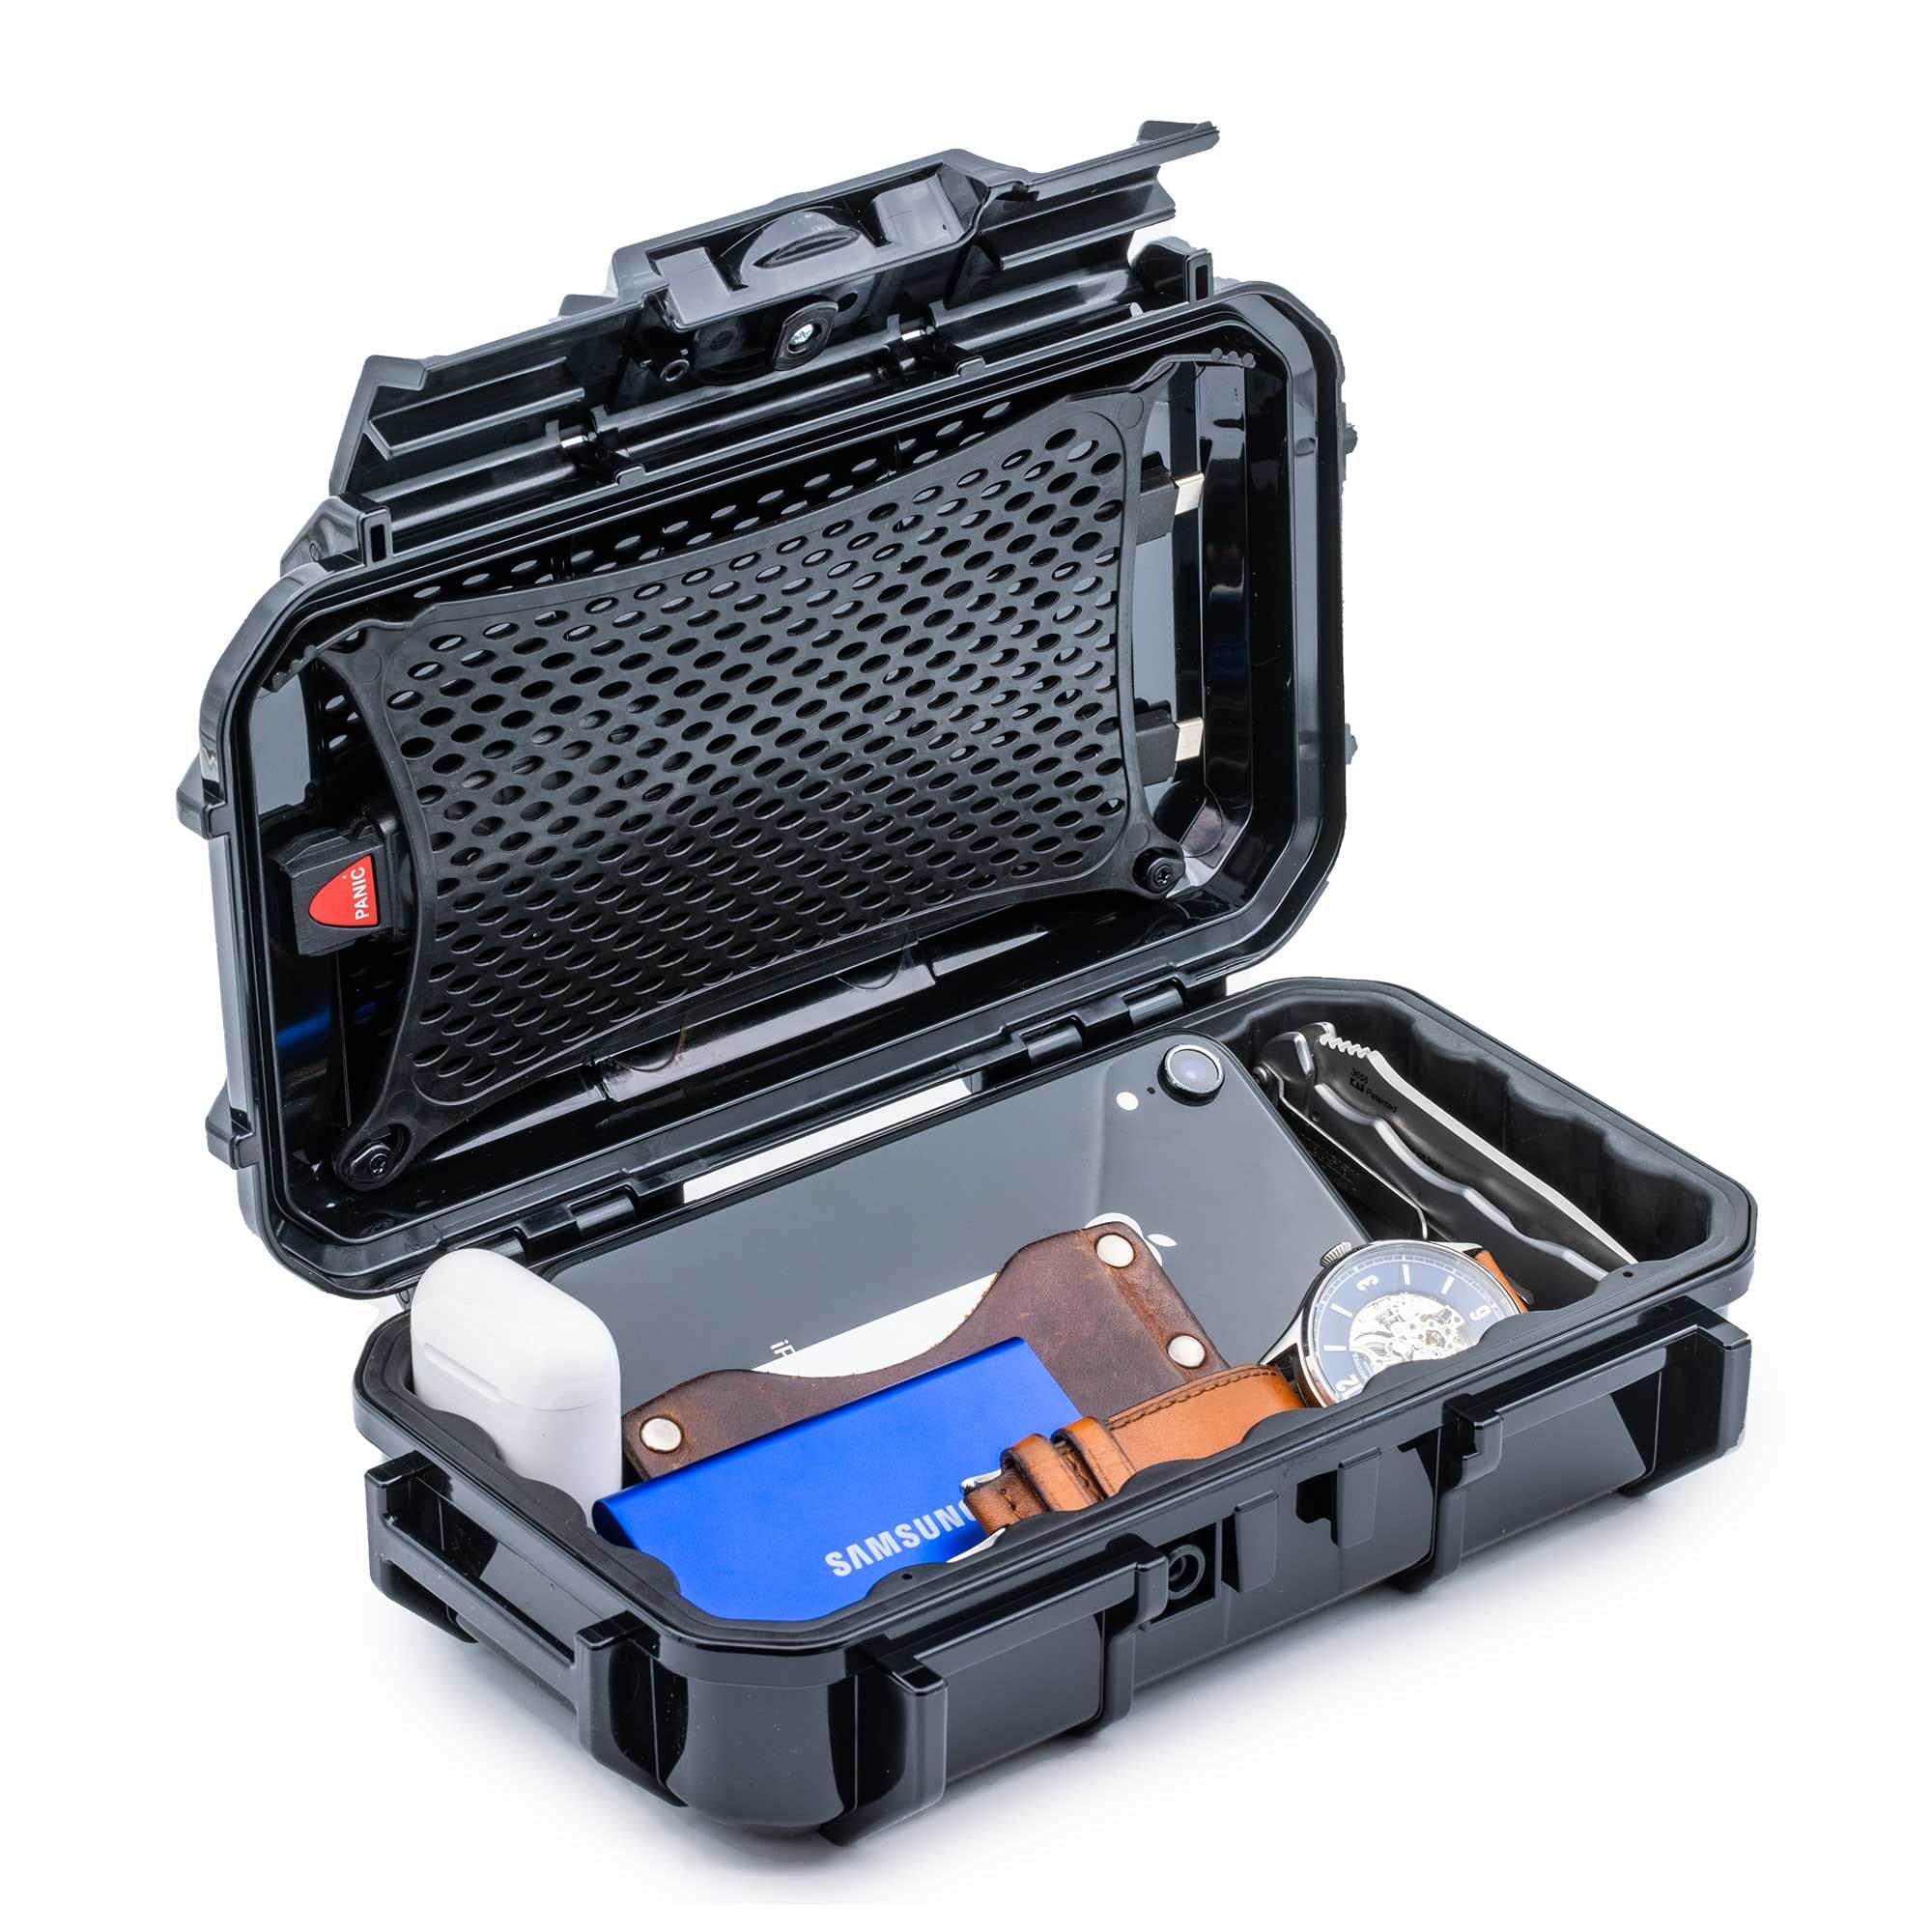 Evergreen 56 Waterproof Dry Box Protective Case - Travel Safe/Mil